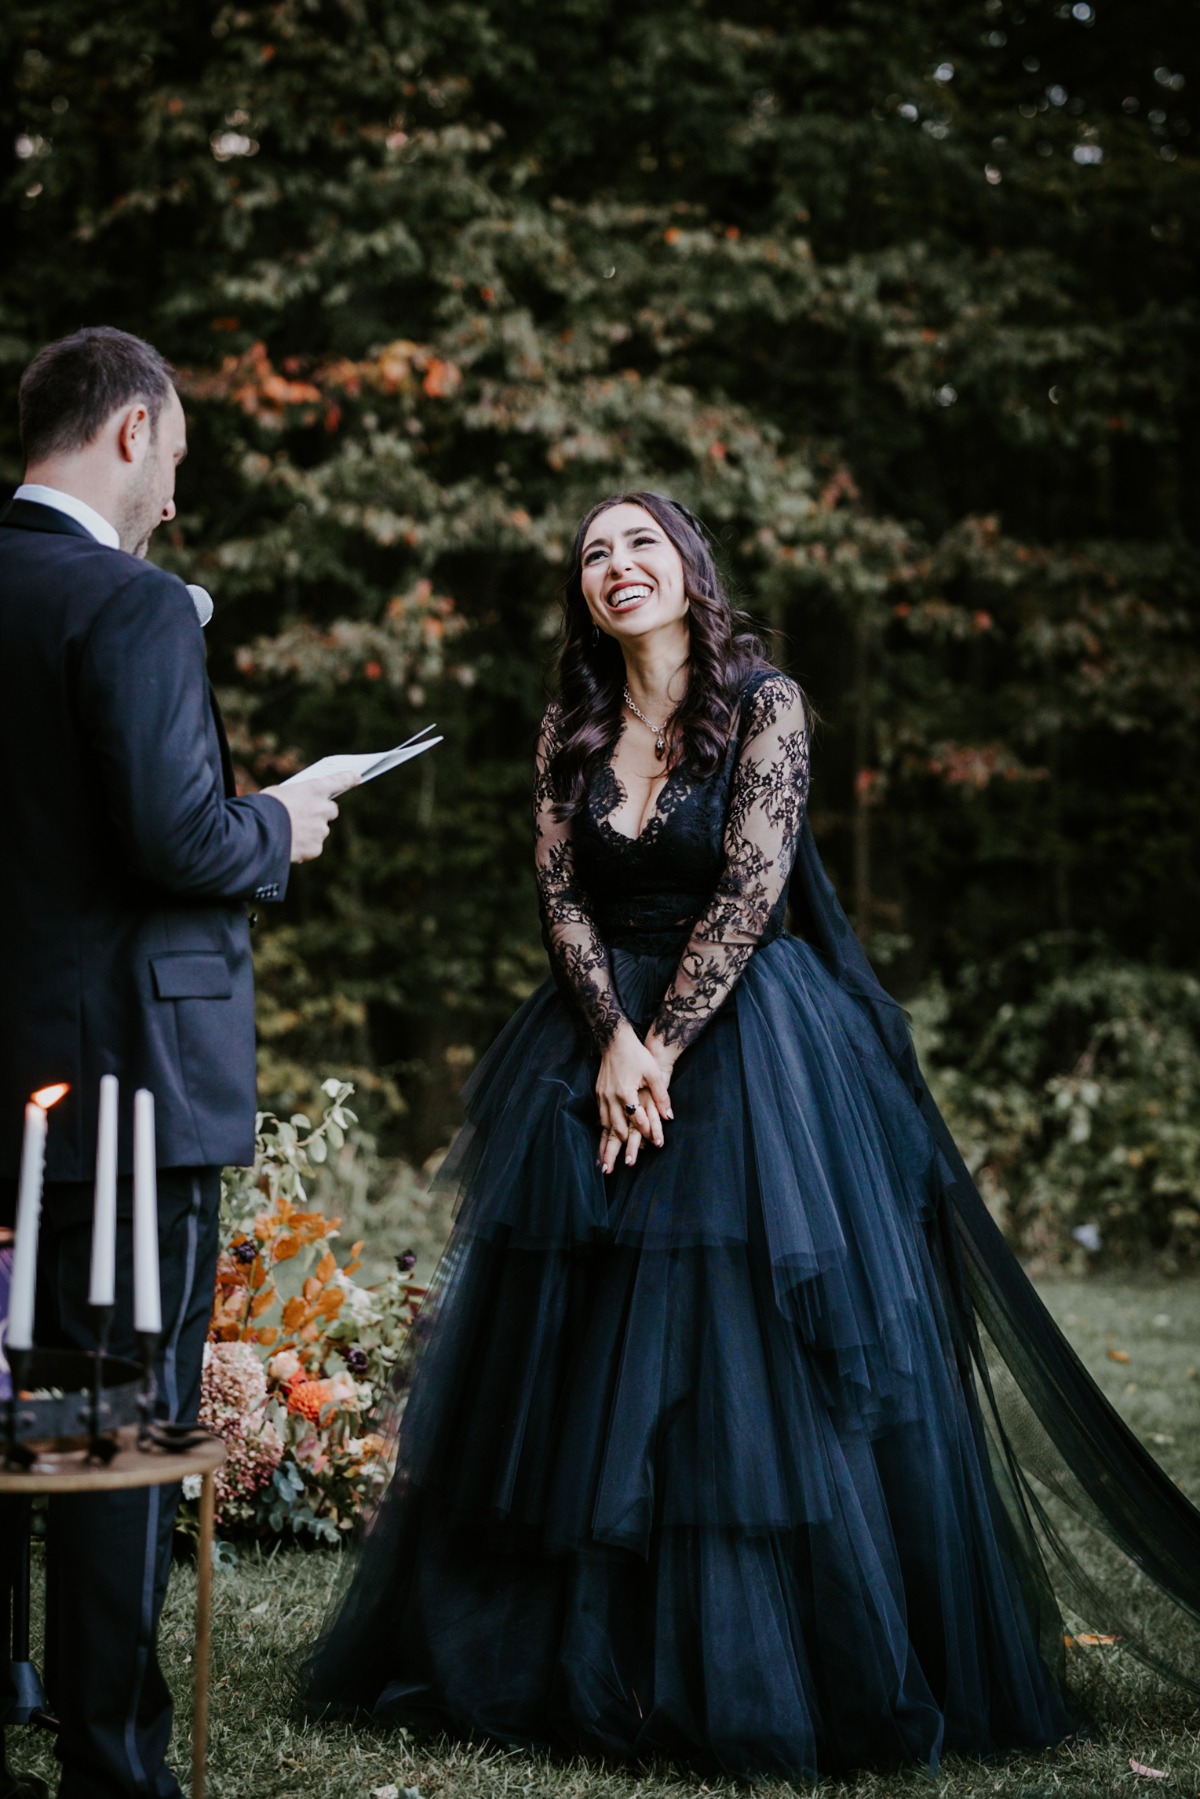 Laughing bride in black wedding dress at outdoor ceremony